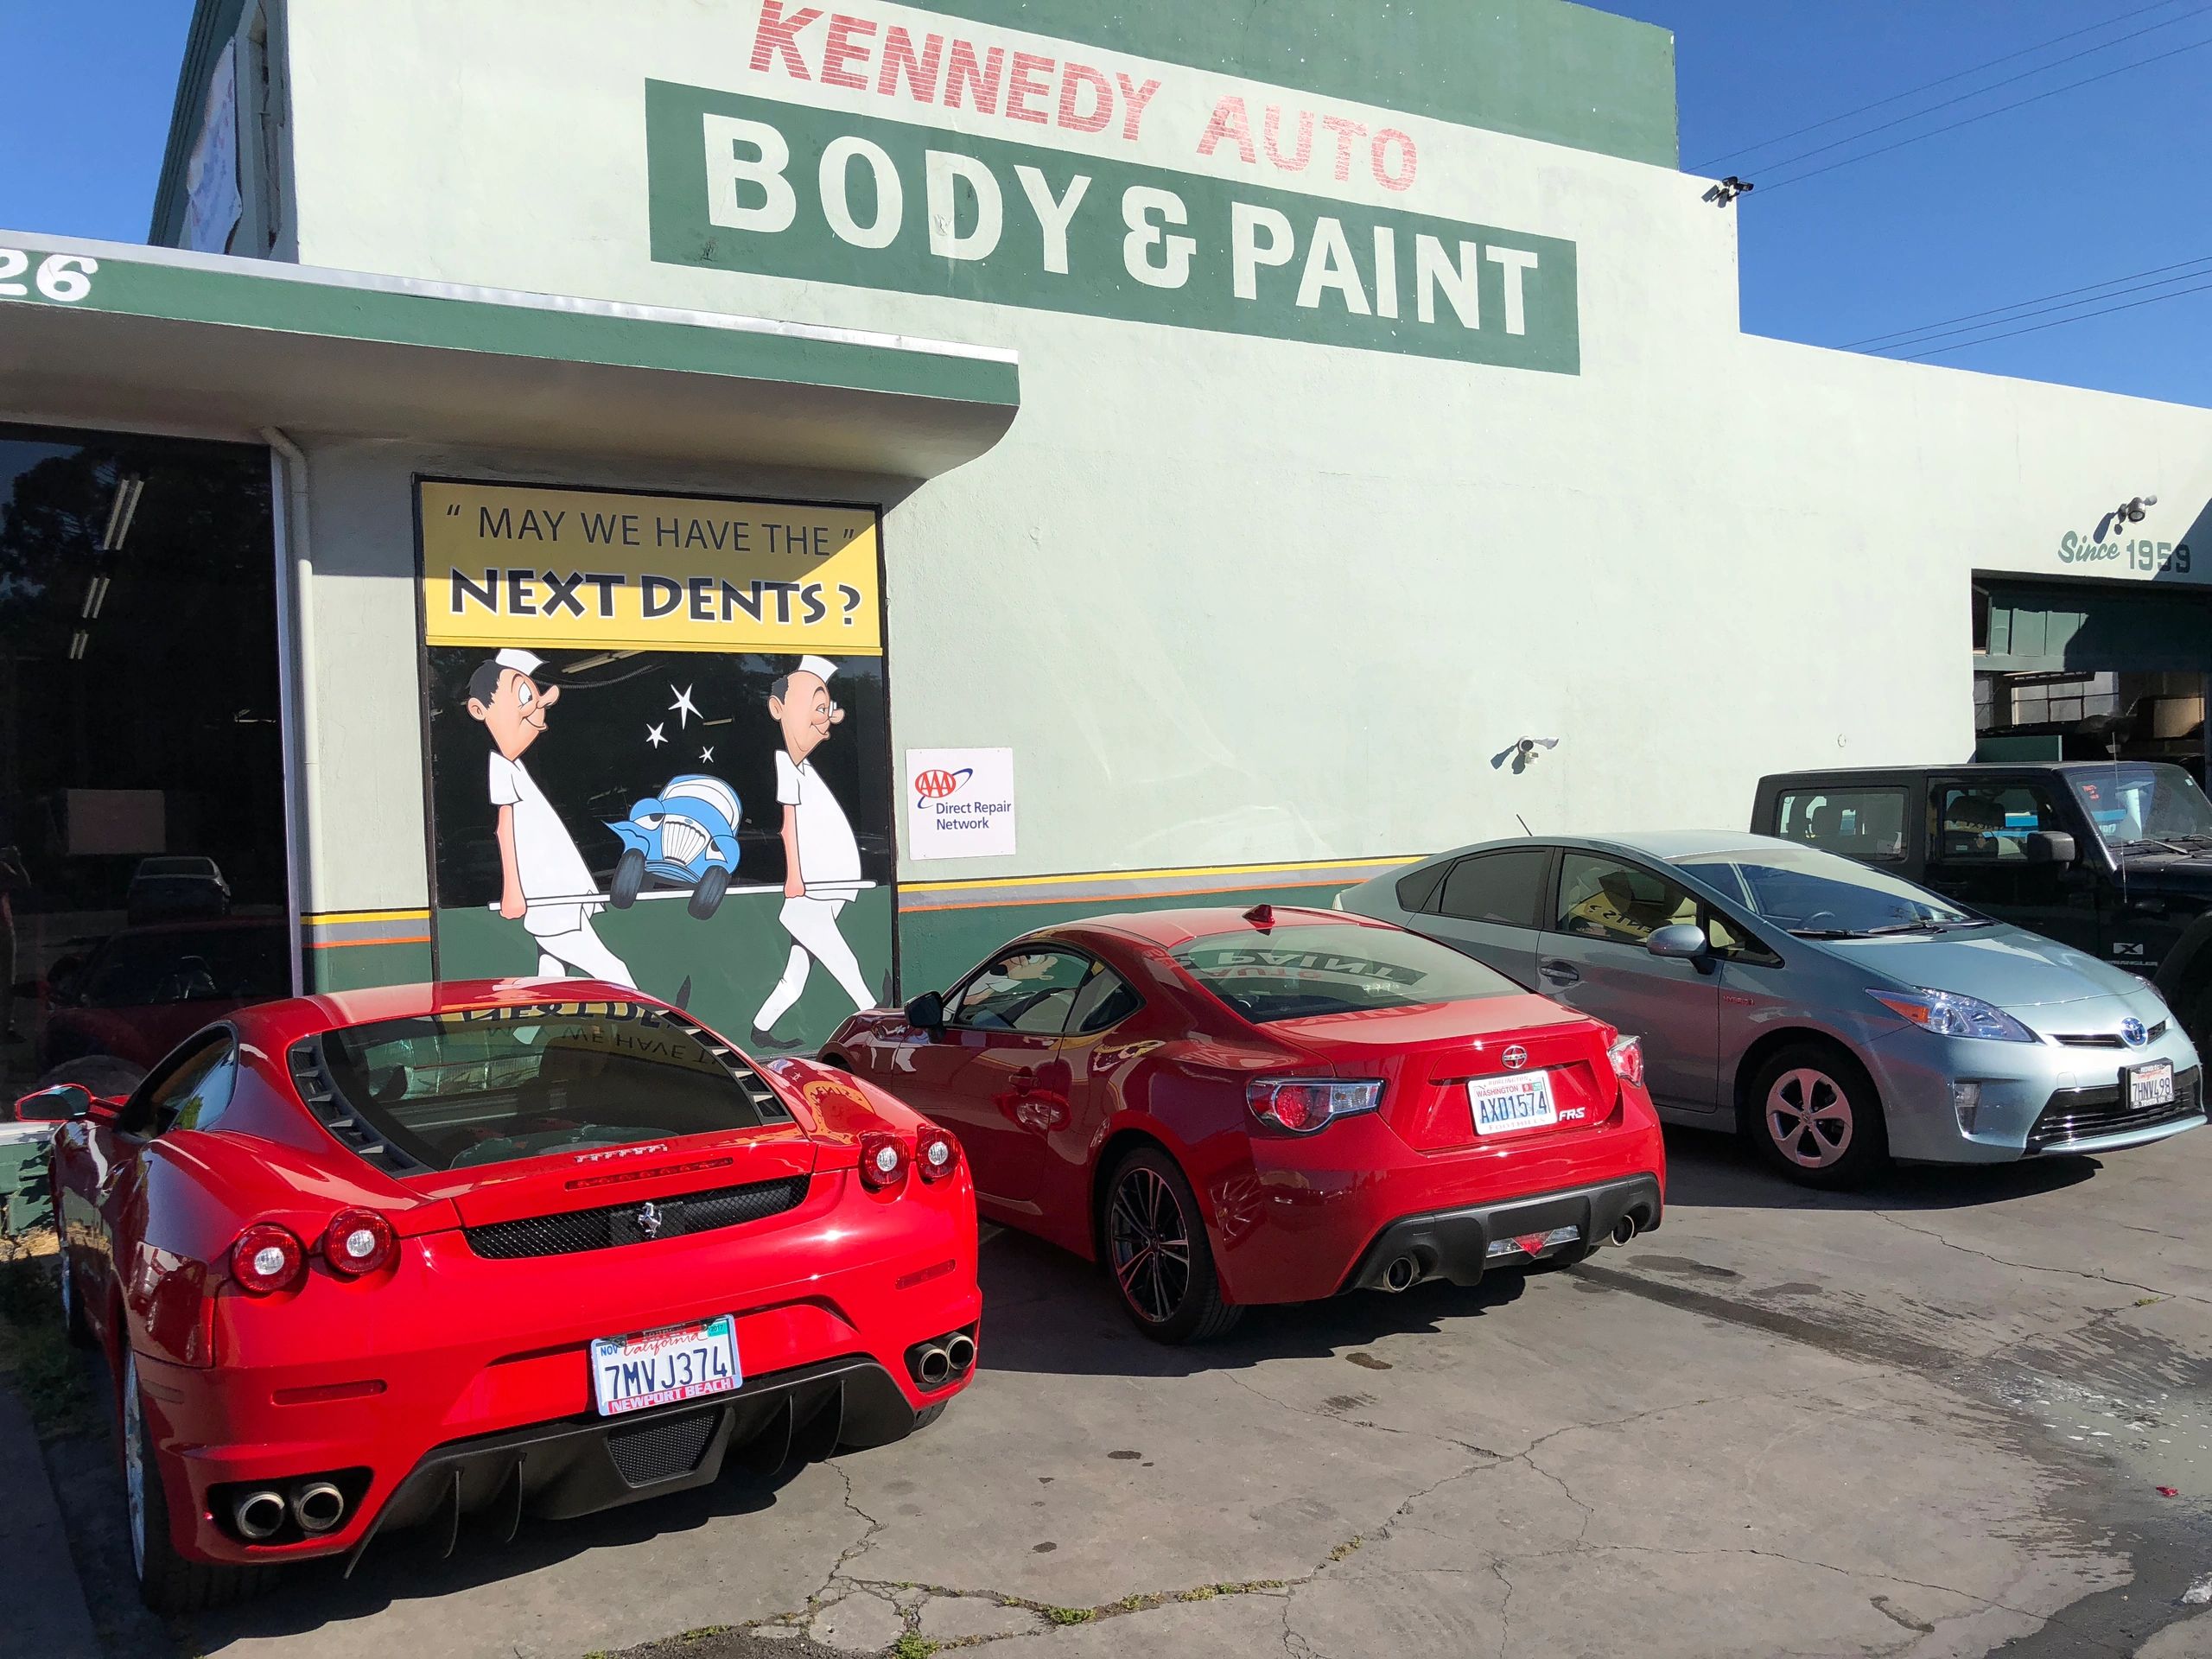 Kennedy Auto Body  Painting